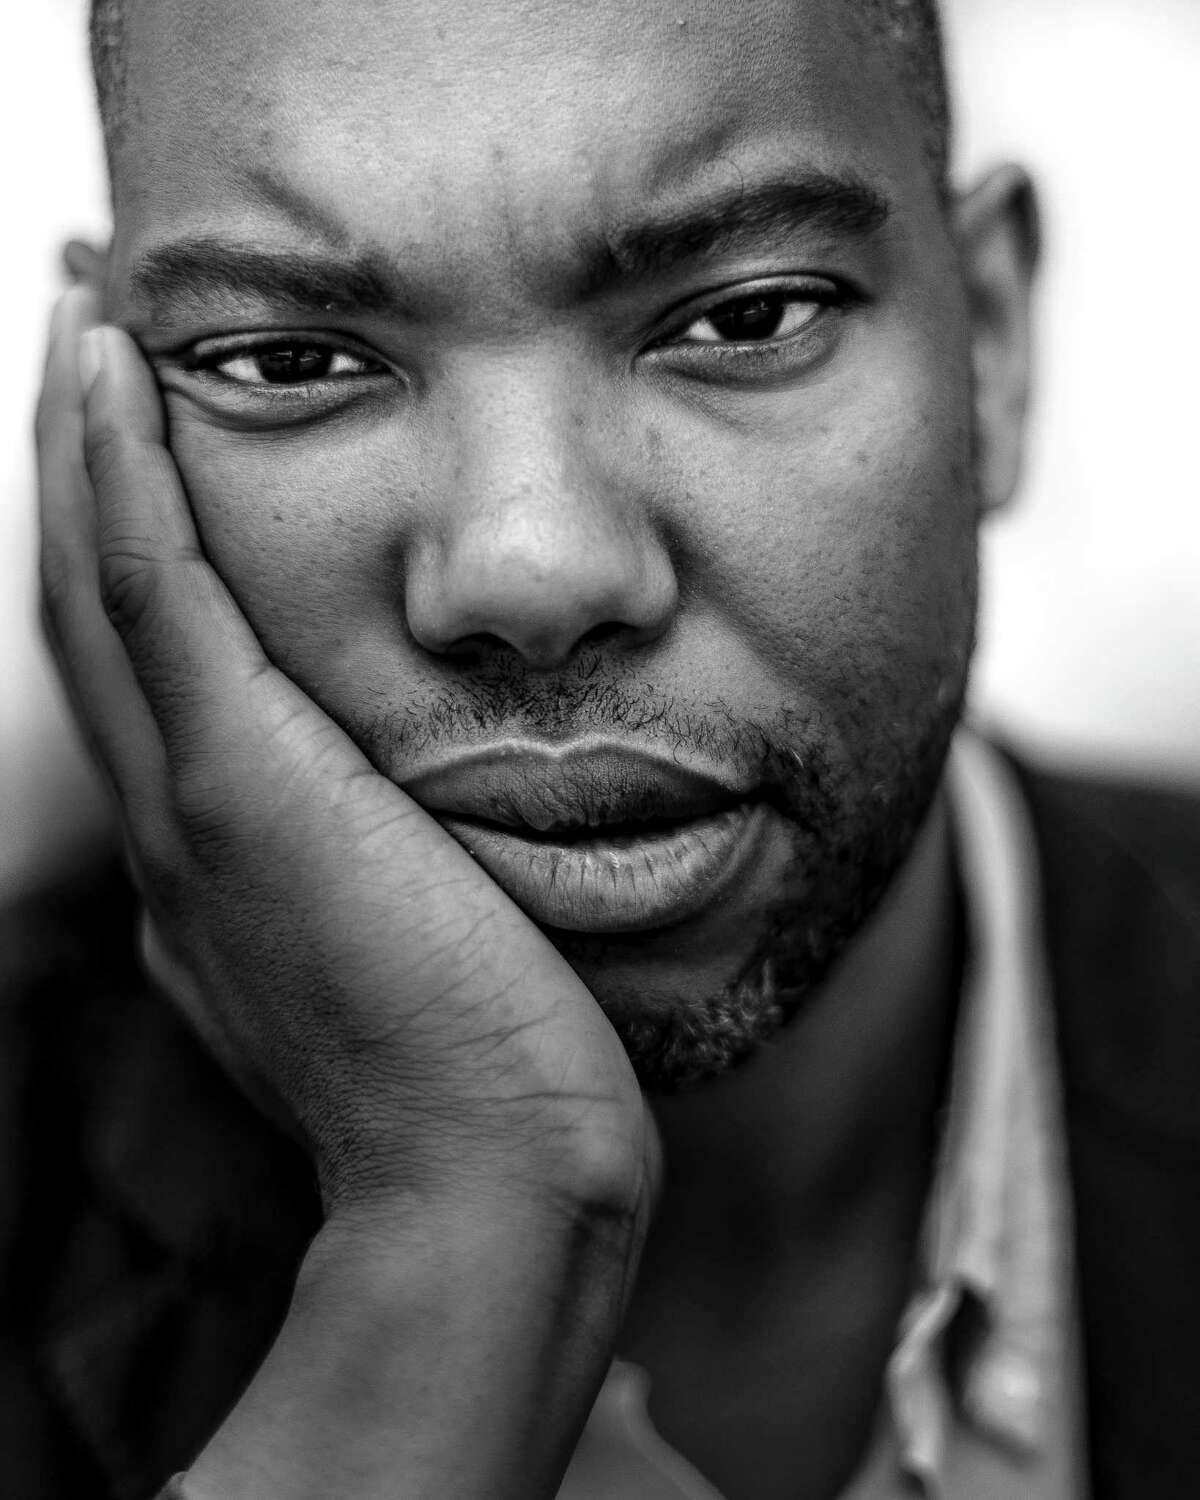 Superfan Ta-Nehisi Coates, a National Book Award winner and the national correspondent for The Atlantic, has a not-so-secret identity as a Marvel Comics superfan.